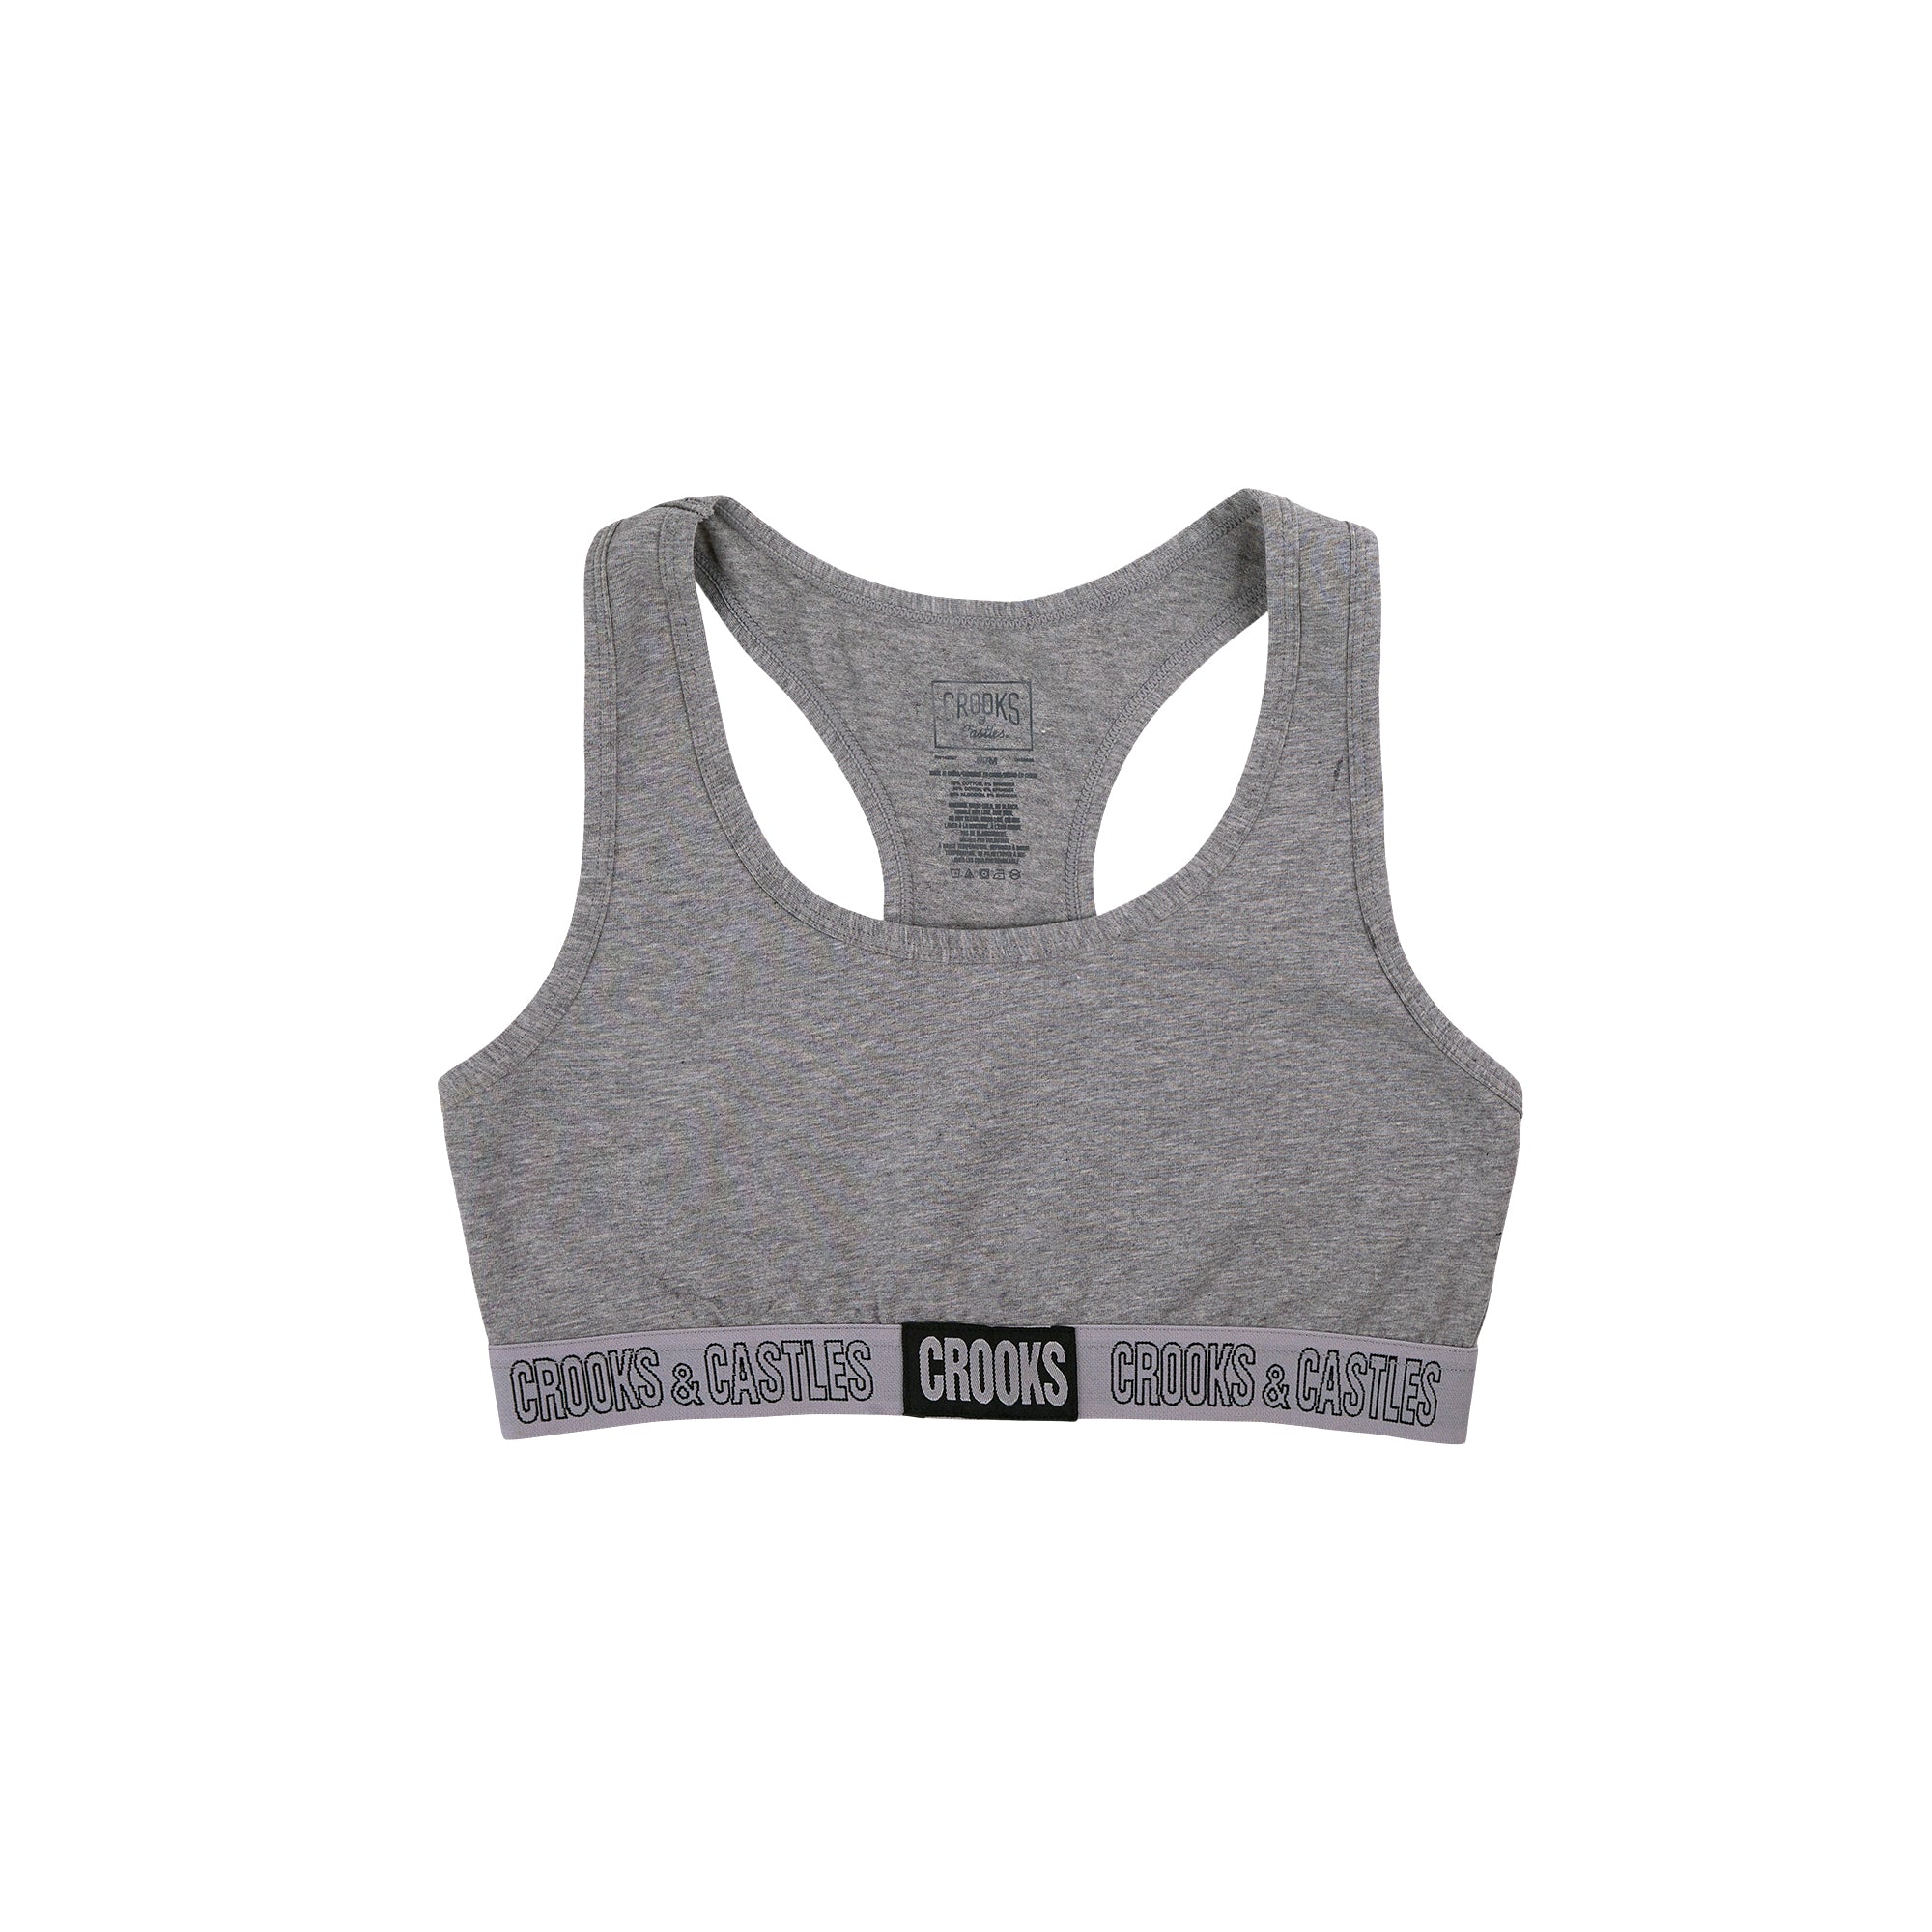 Criss Cross Back Sports Bra Clothing in Folkstone Gray - Get great